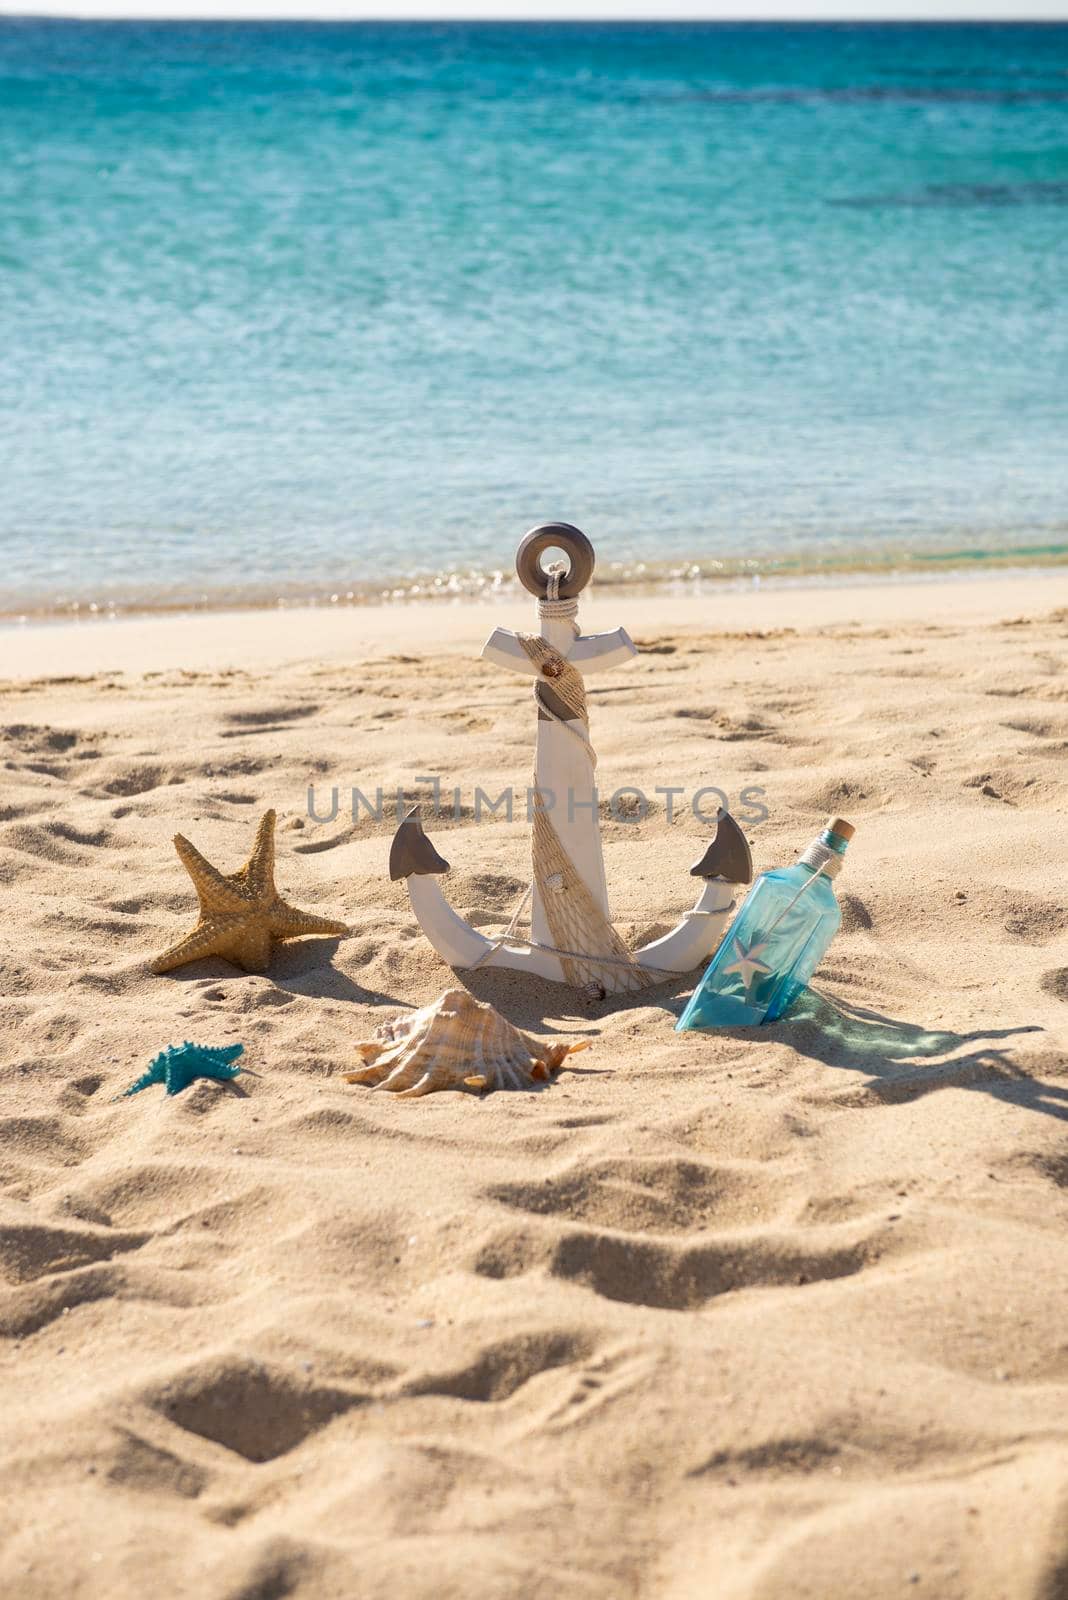 Closeup of still life objects decoration on tropical island sandy beach paradise with ocean in background